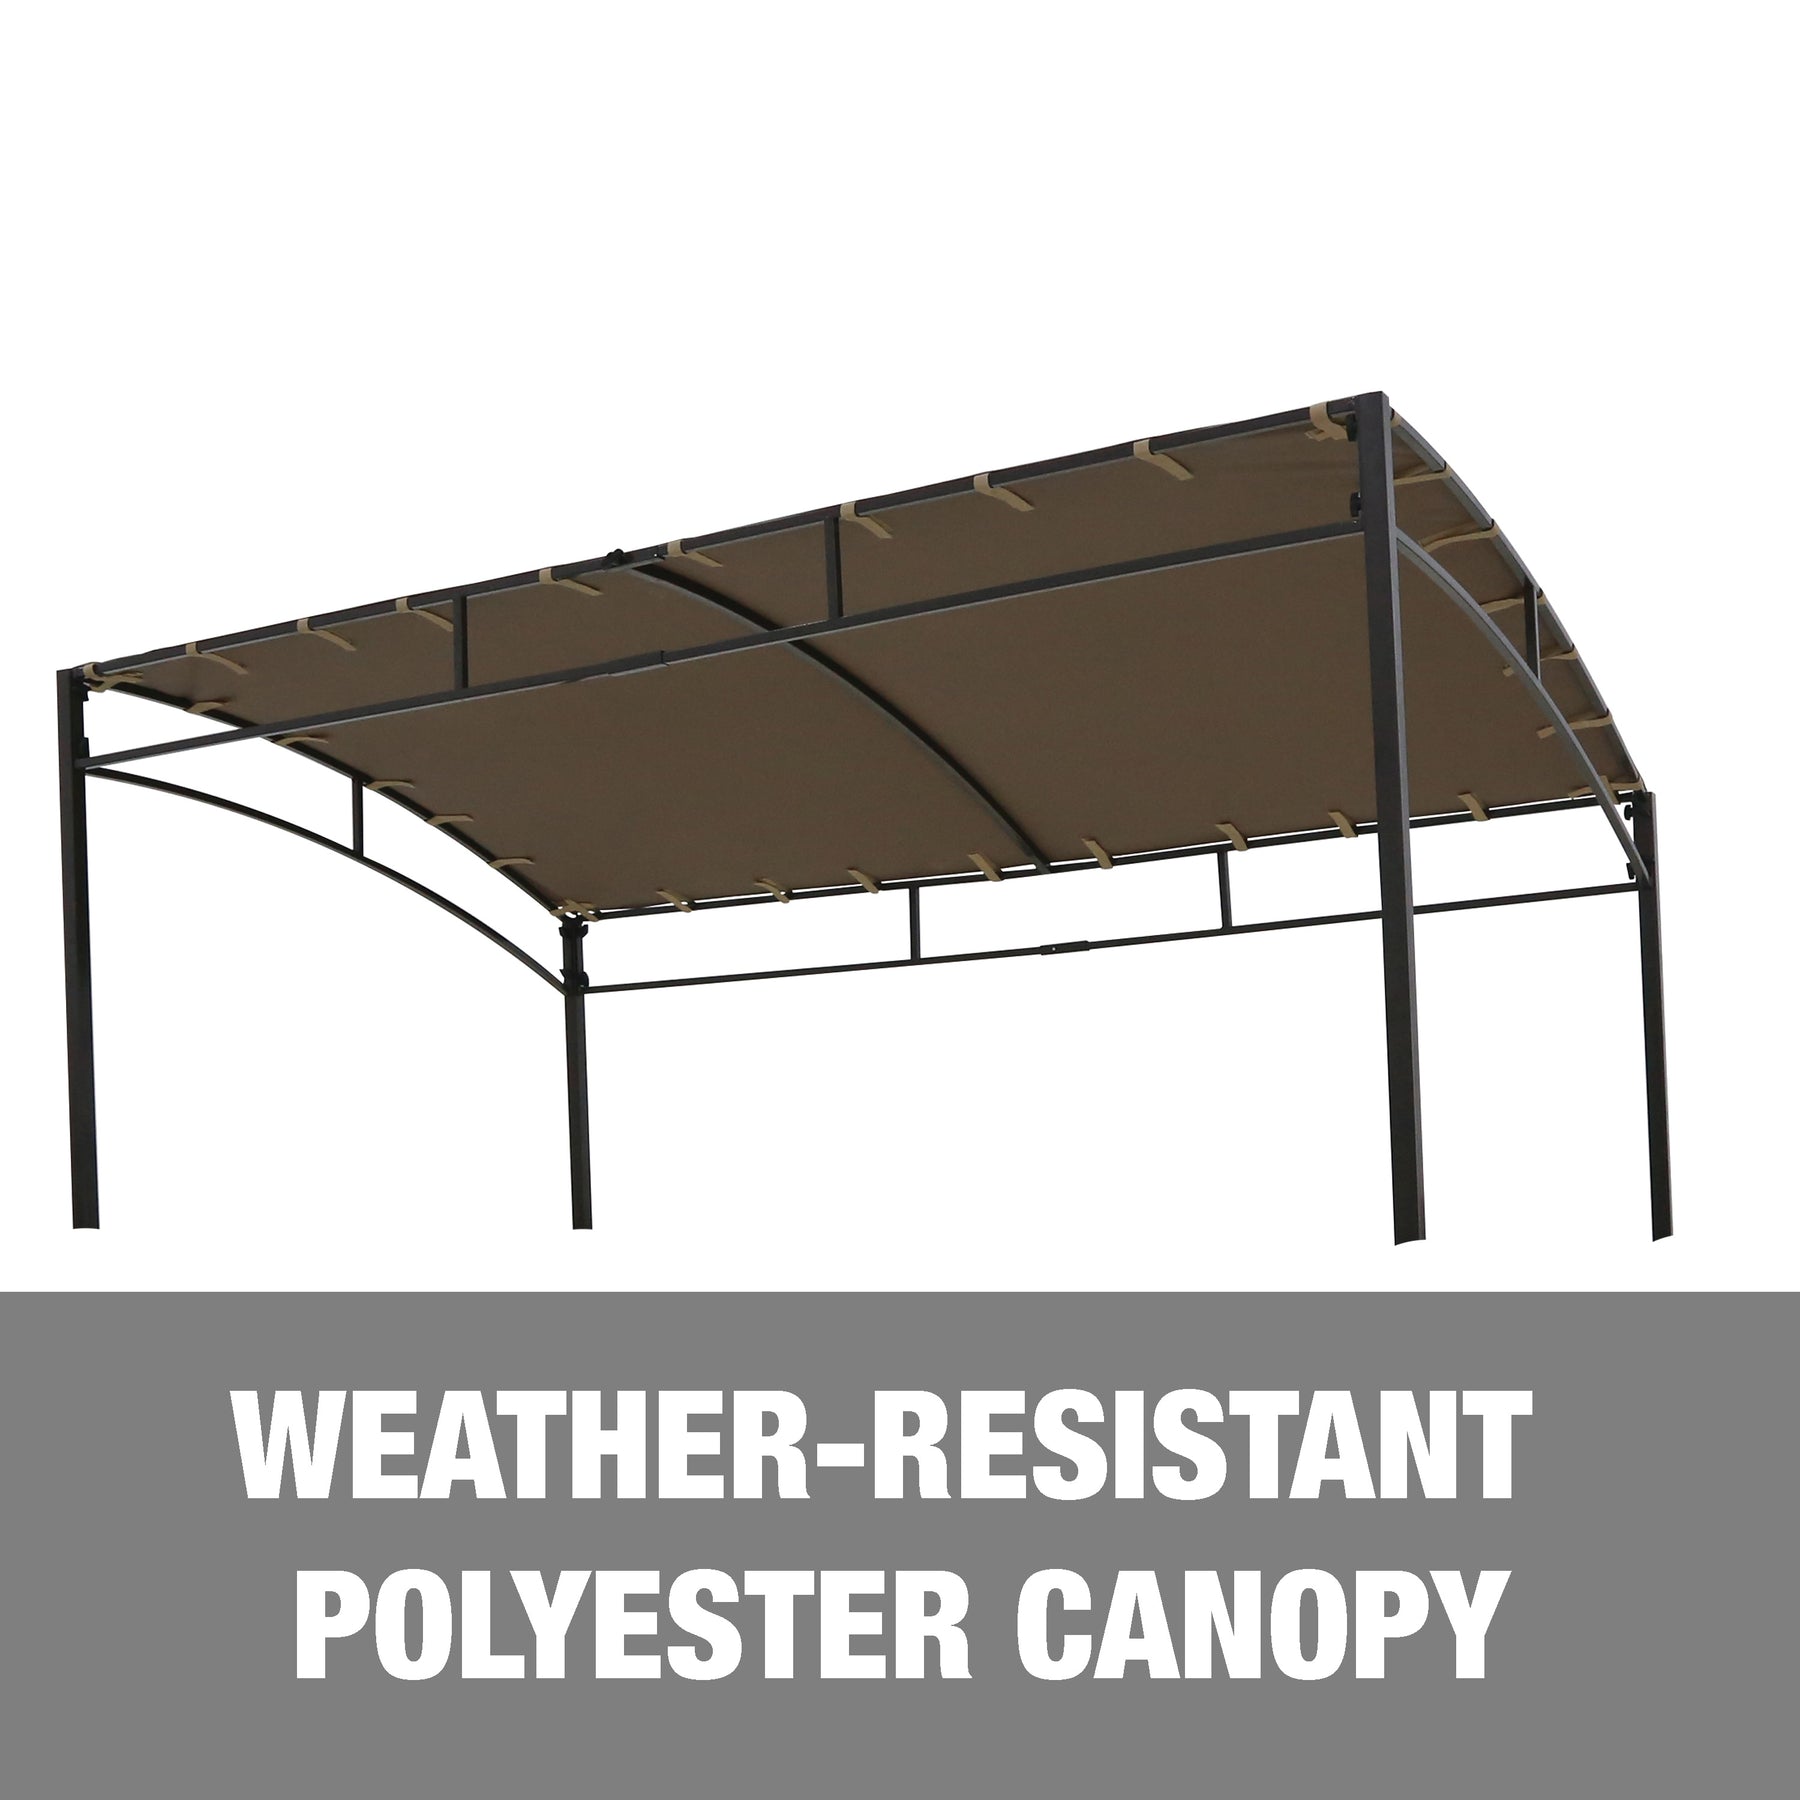 Weather-resistant polyester canopy.